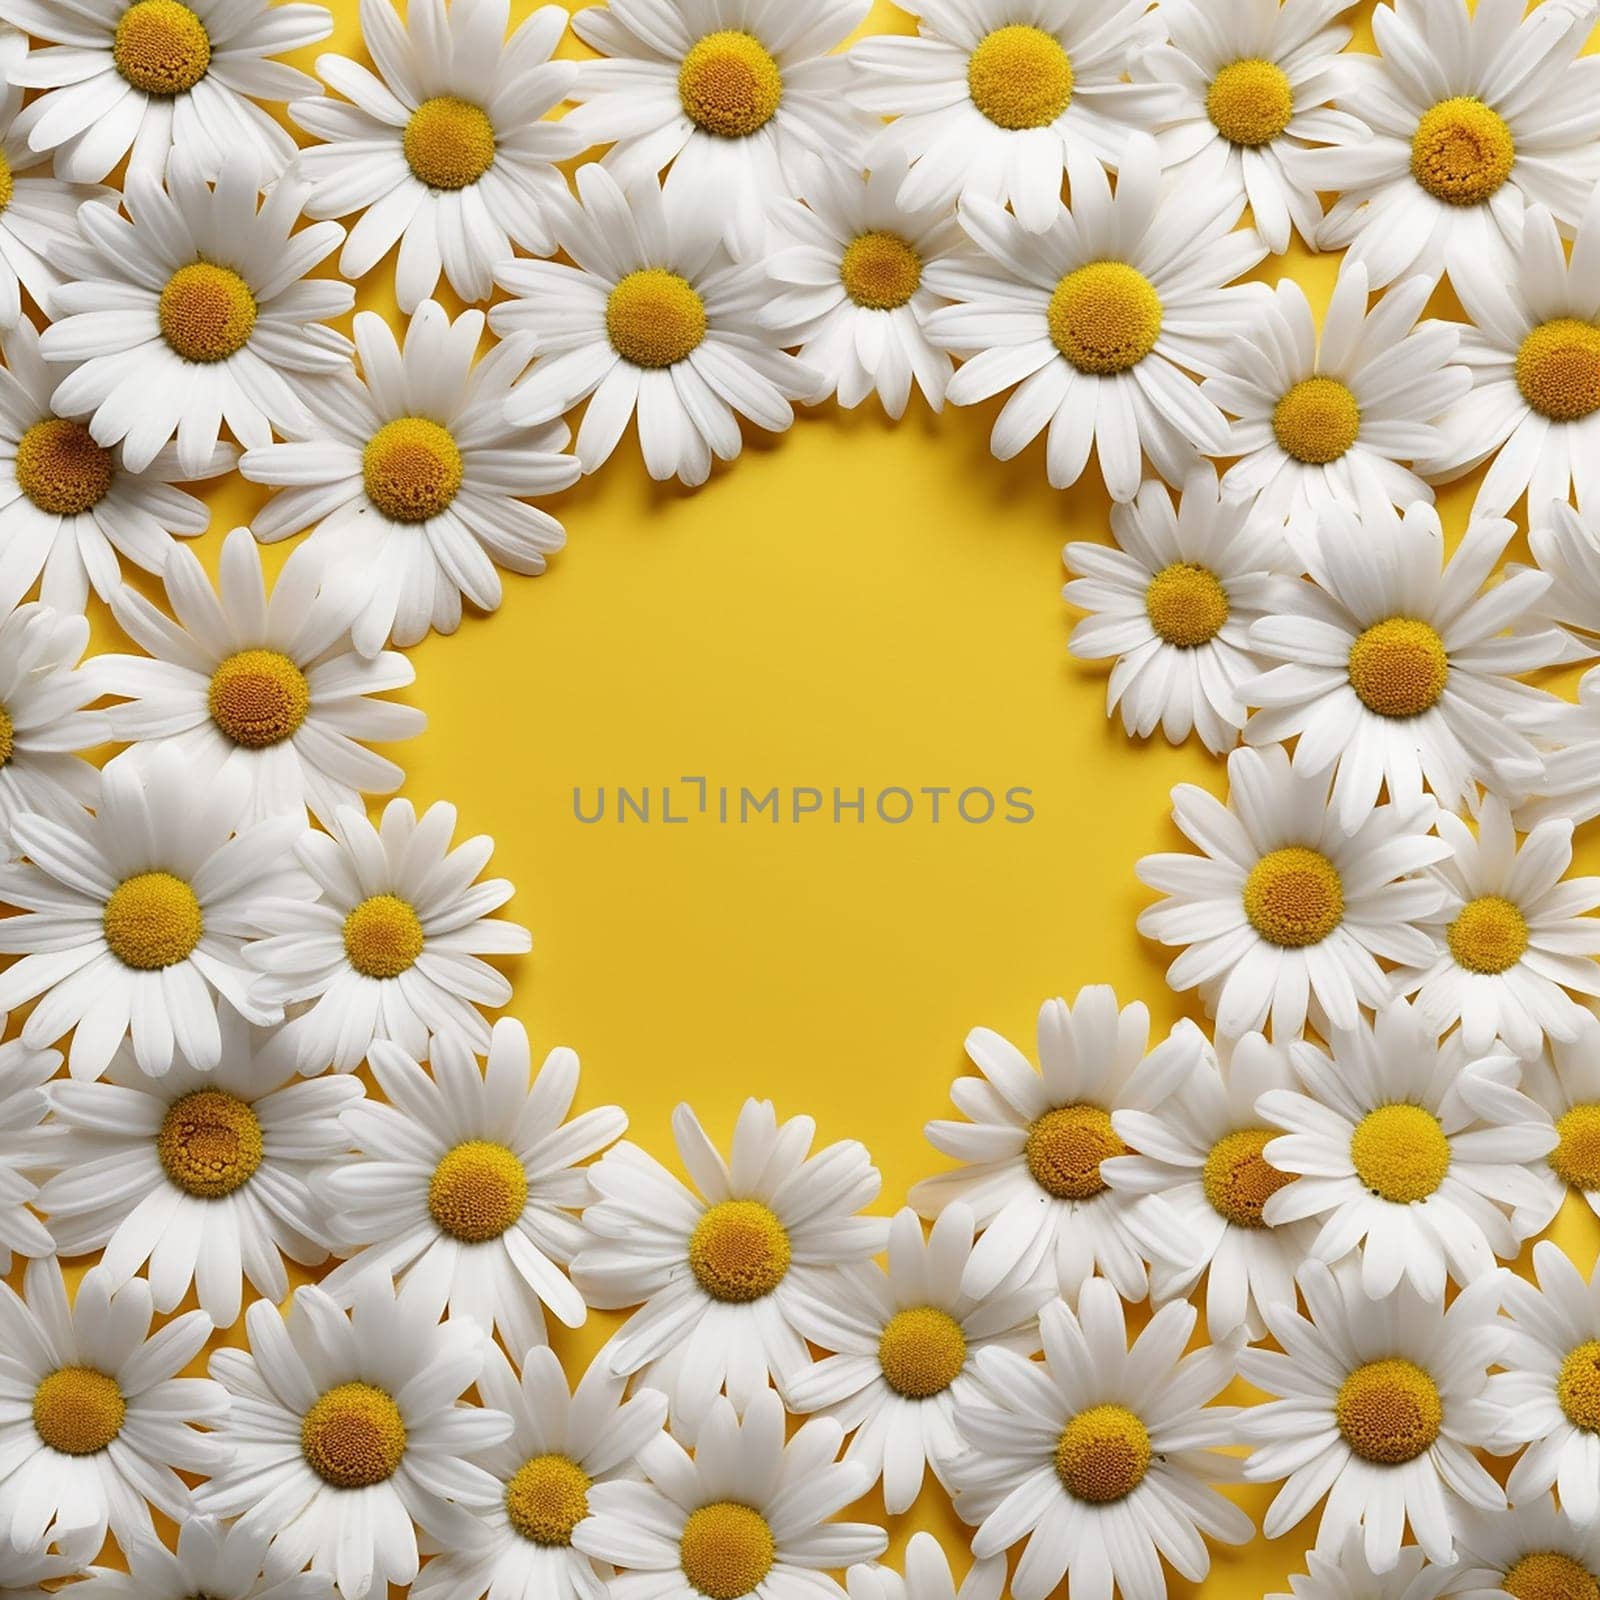 White daisies forming a heart shape on a yellow background. by Hype2art